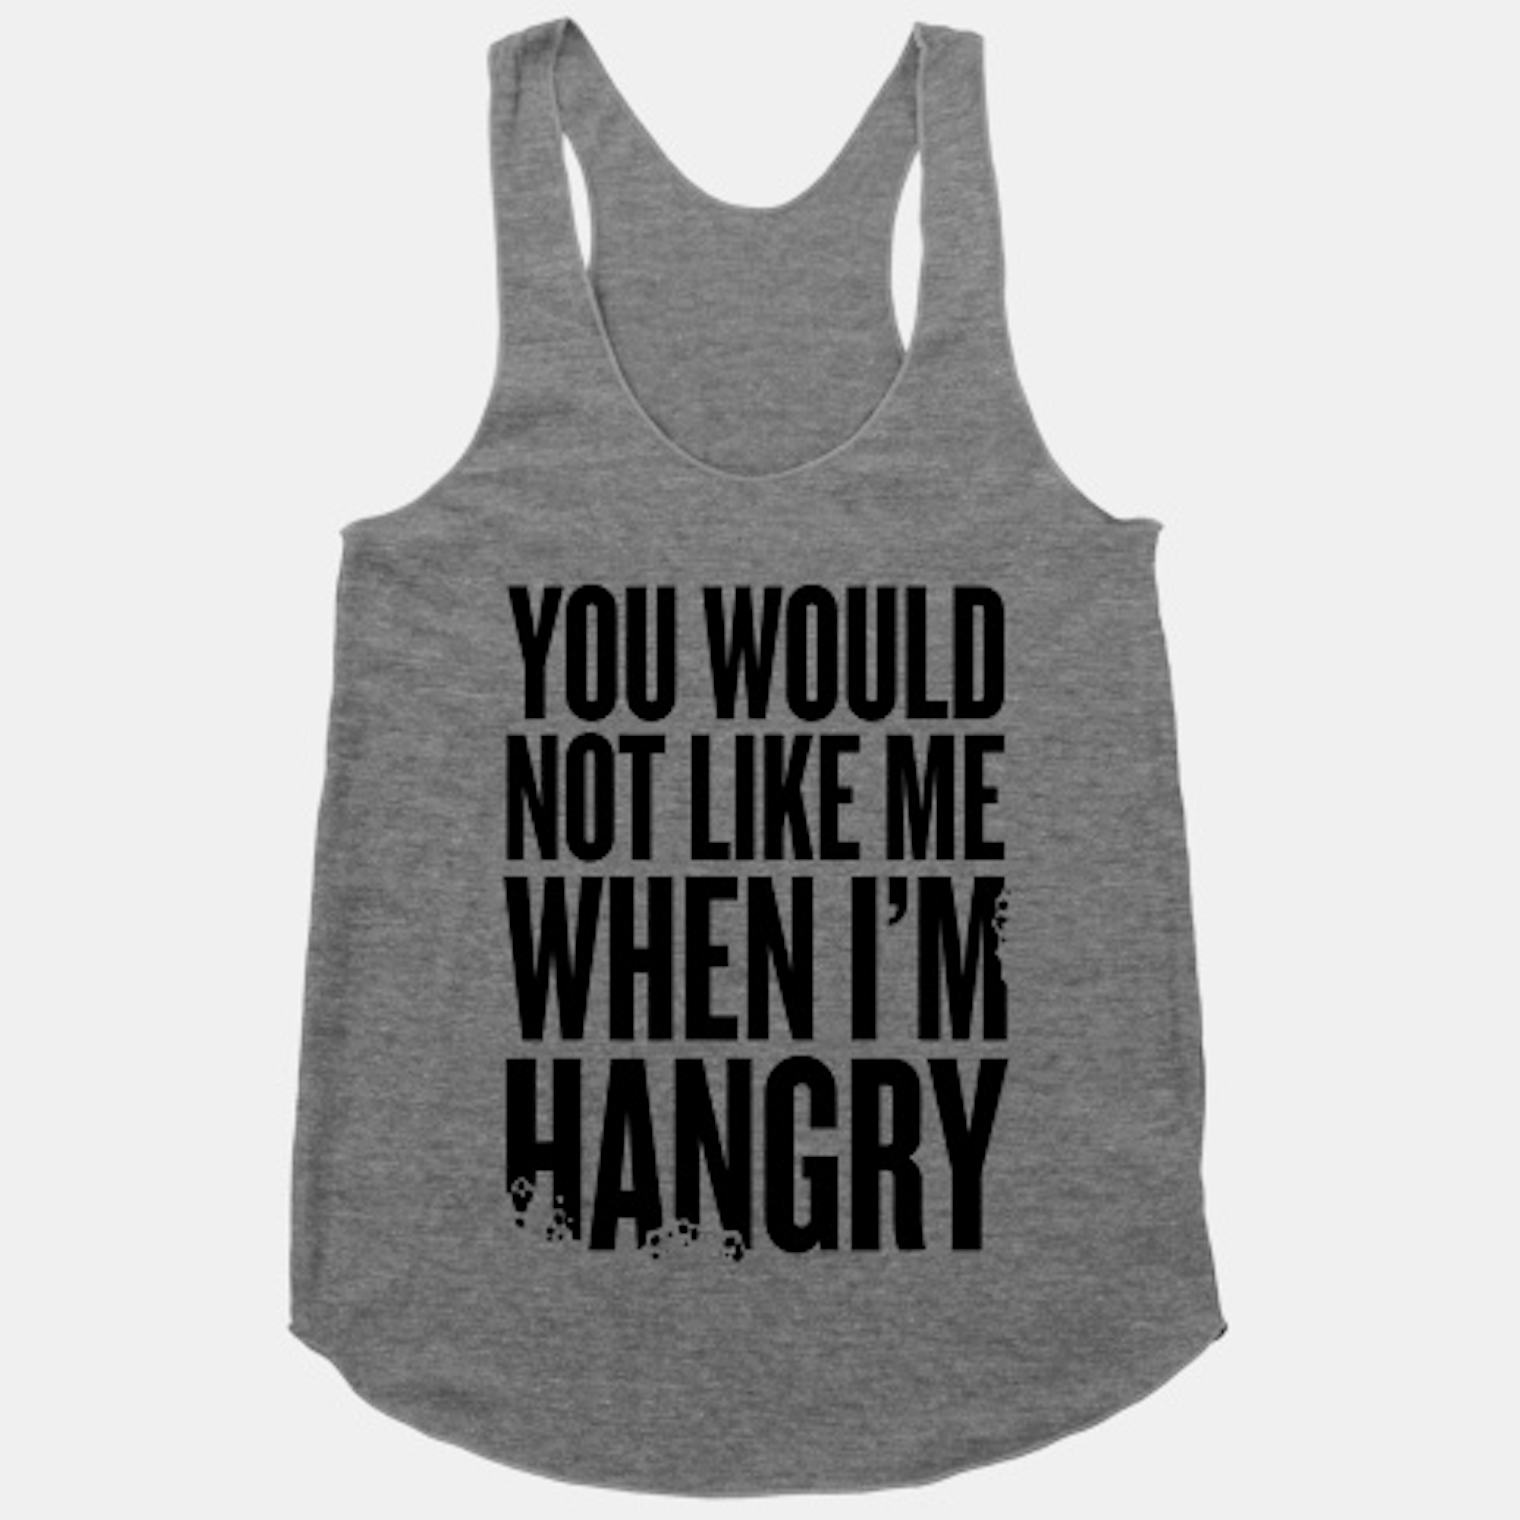 12 Things That Being Hangry Does To Even The Most Reasonable People